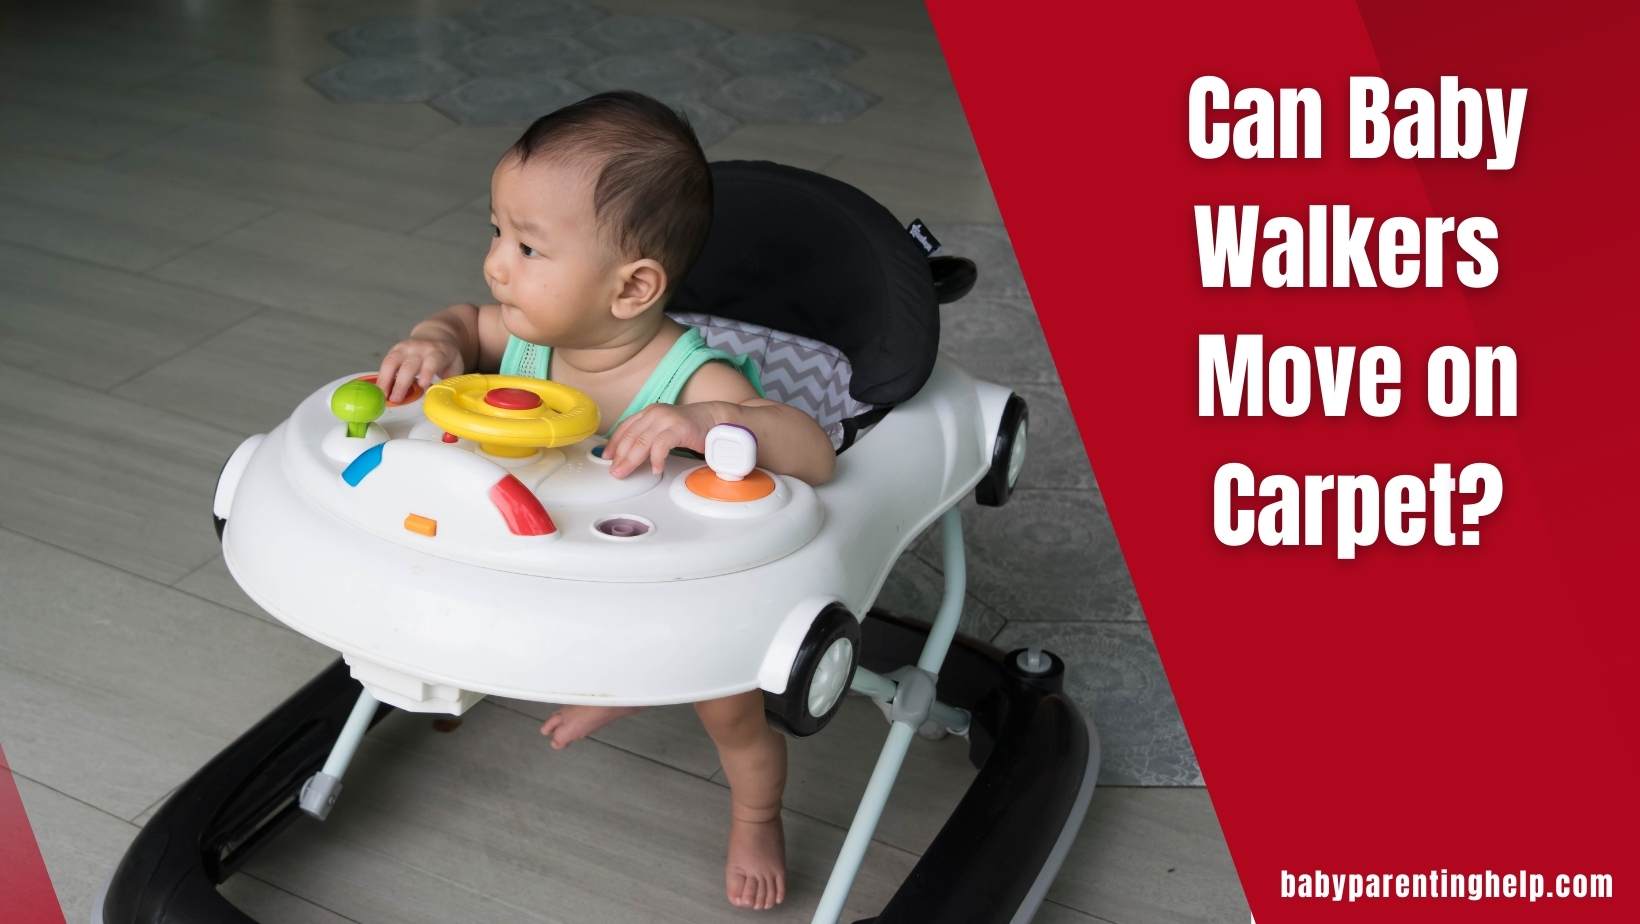 Can Baby Walkers Move on Carpet